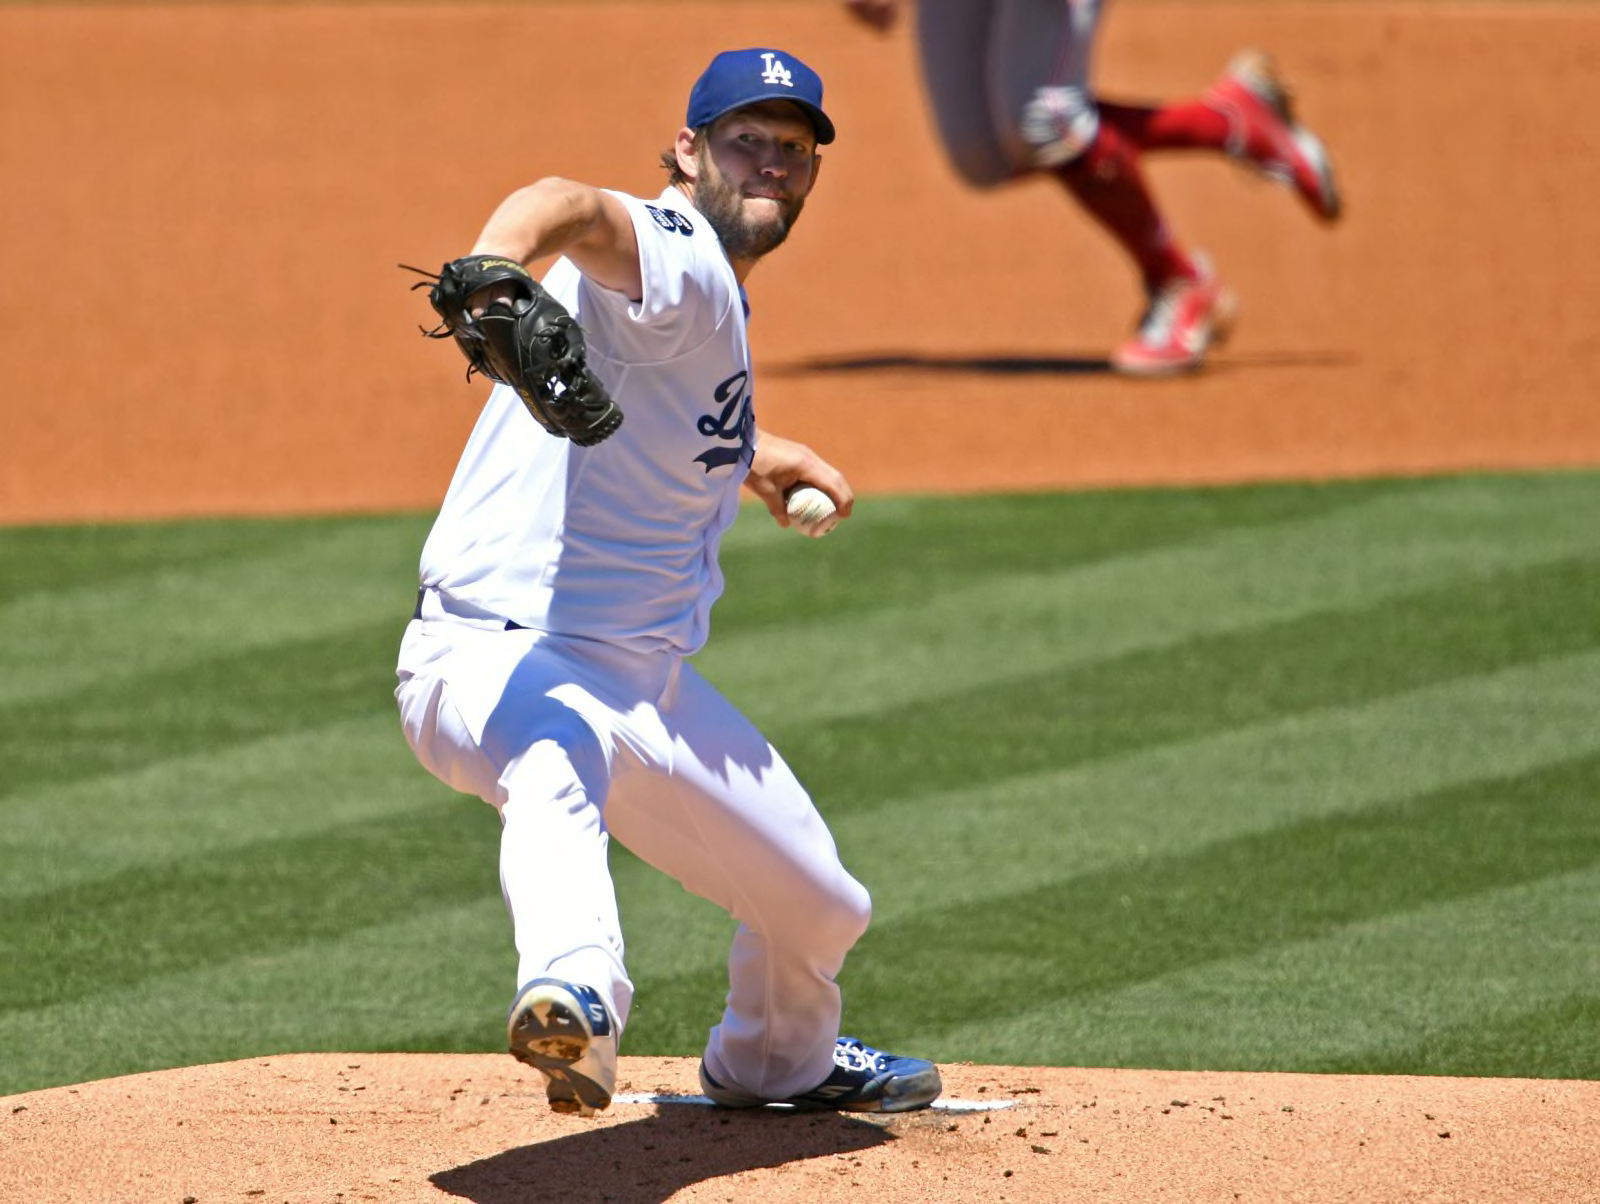 Apr 28, 2021; Los Angeles, California, USA; Los Angeles Dodgers starting pitcher Clayton Kershaw (22) pitches in the first inning of the game against the Cincinnati Reds at Dodger Stadium. Mandatory Credit: Jayne Kamin-Oncea-USA TODAY Sports